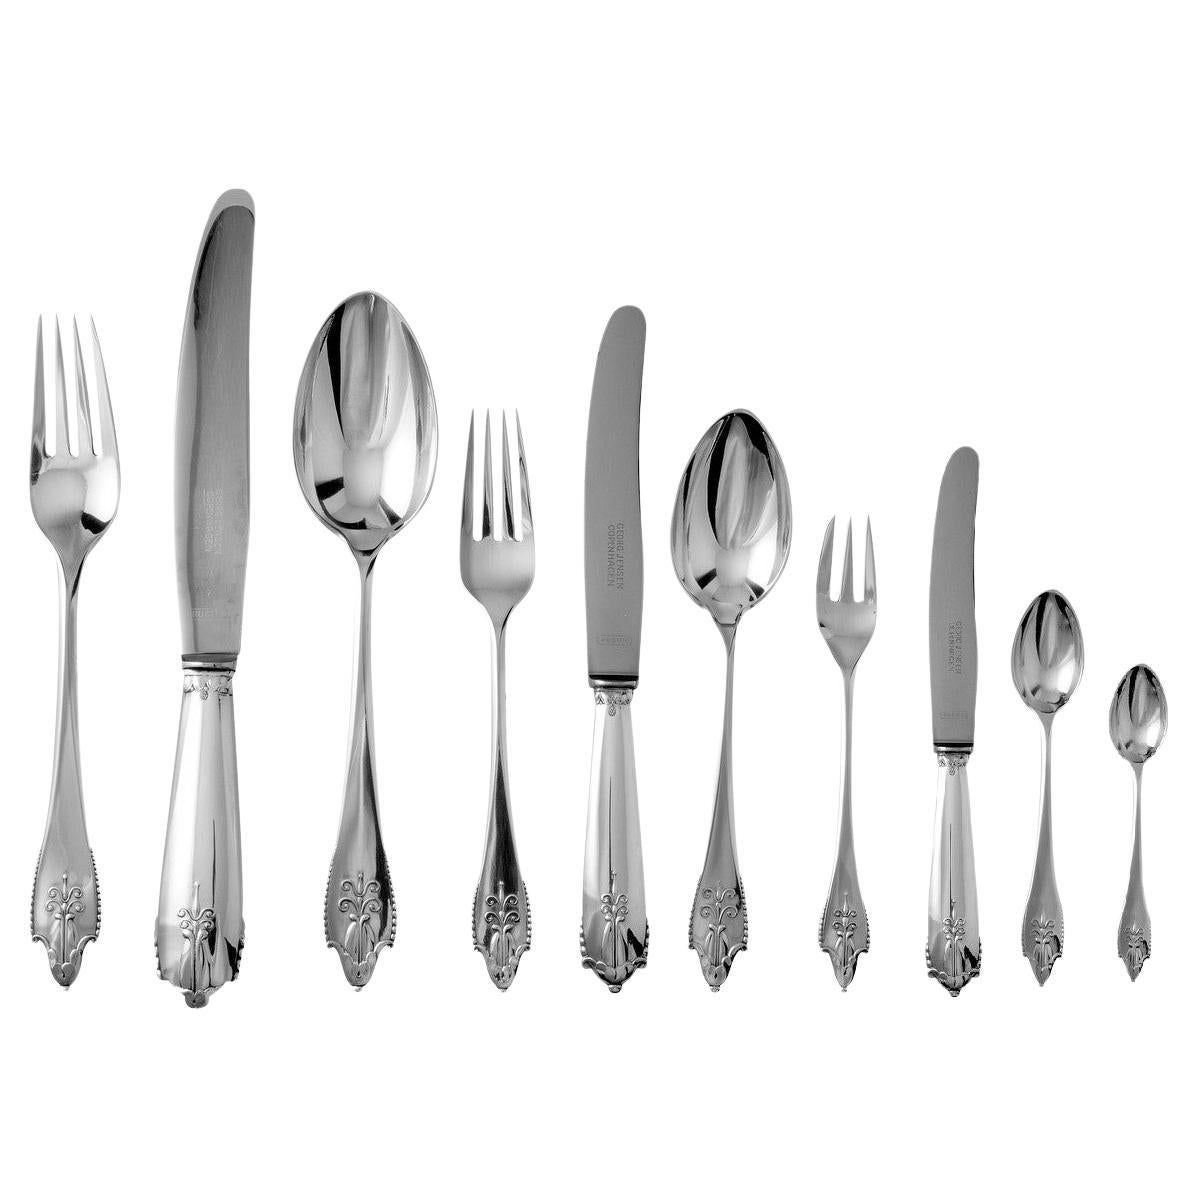 Is Rogers silverware real silver?